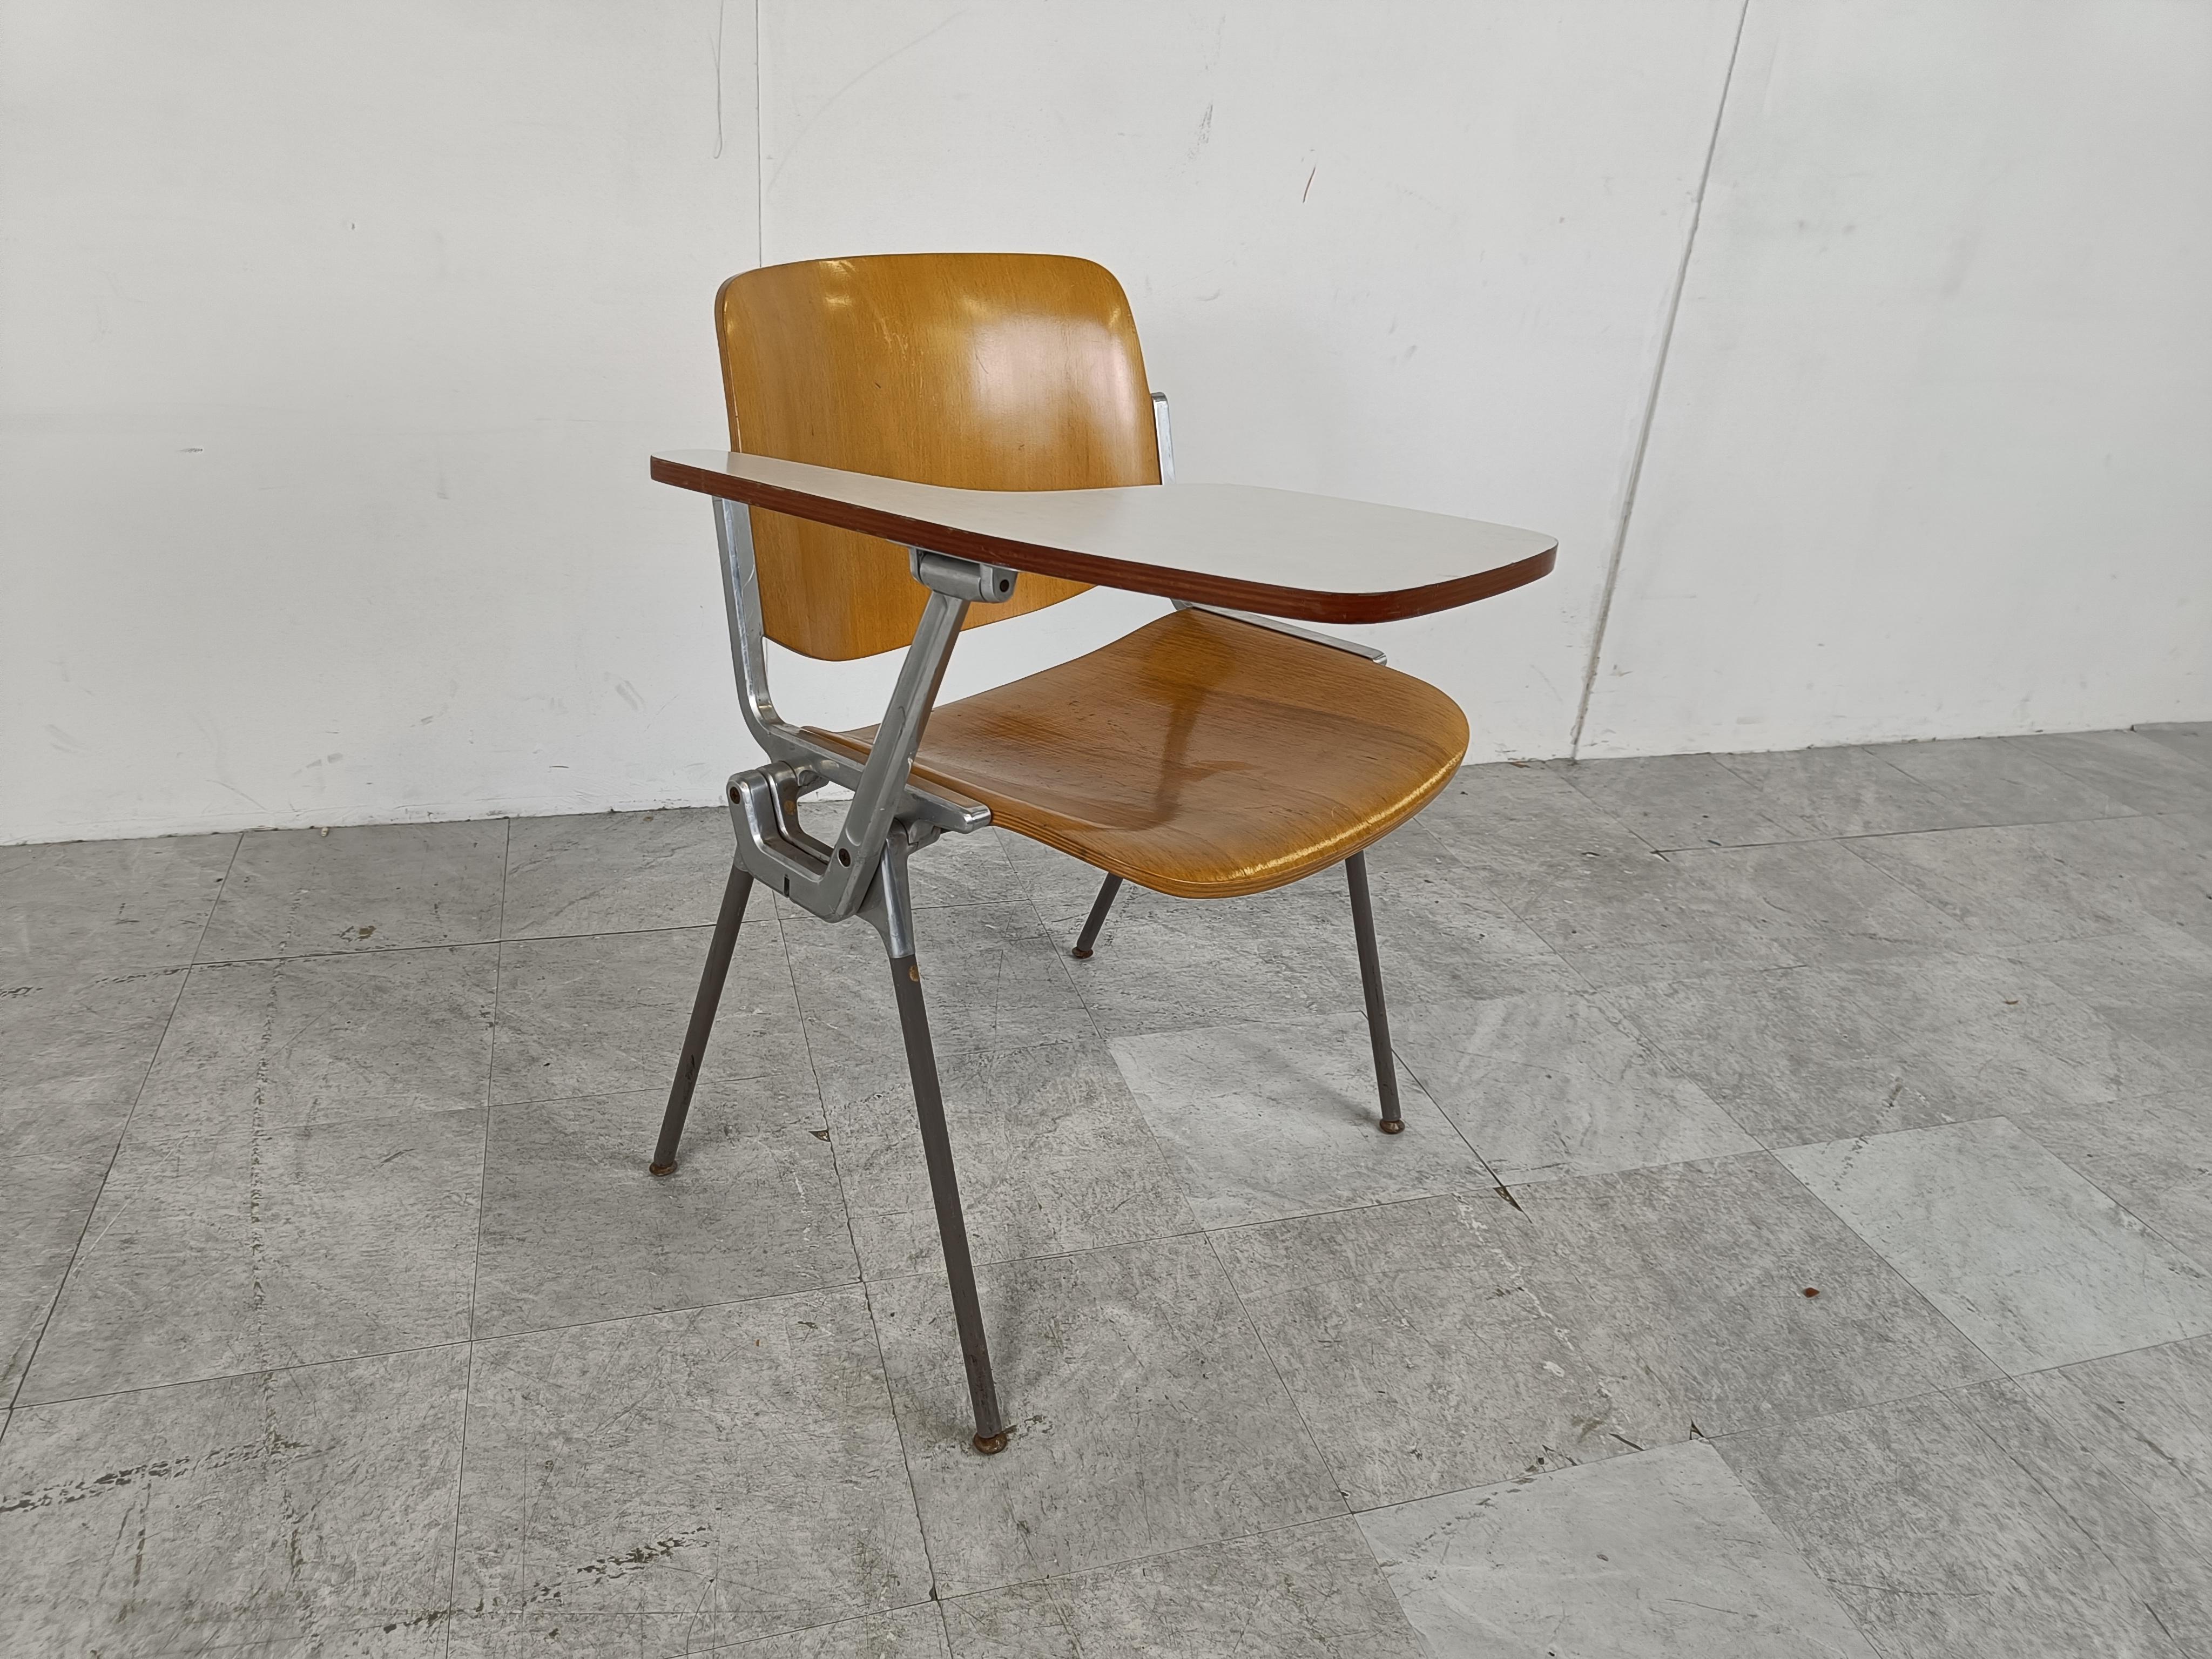 Vintage Dsc 106 Chair by Giancarlo Piretti for Castelli with Folding Table, 1970 In Good Condition For Sale In HEVERLEE, BE